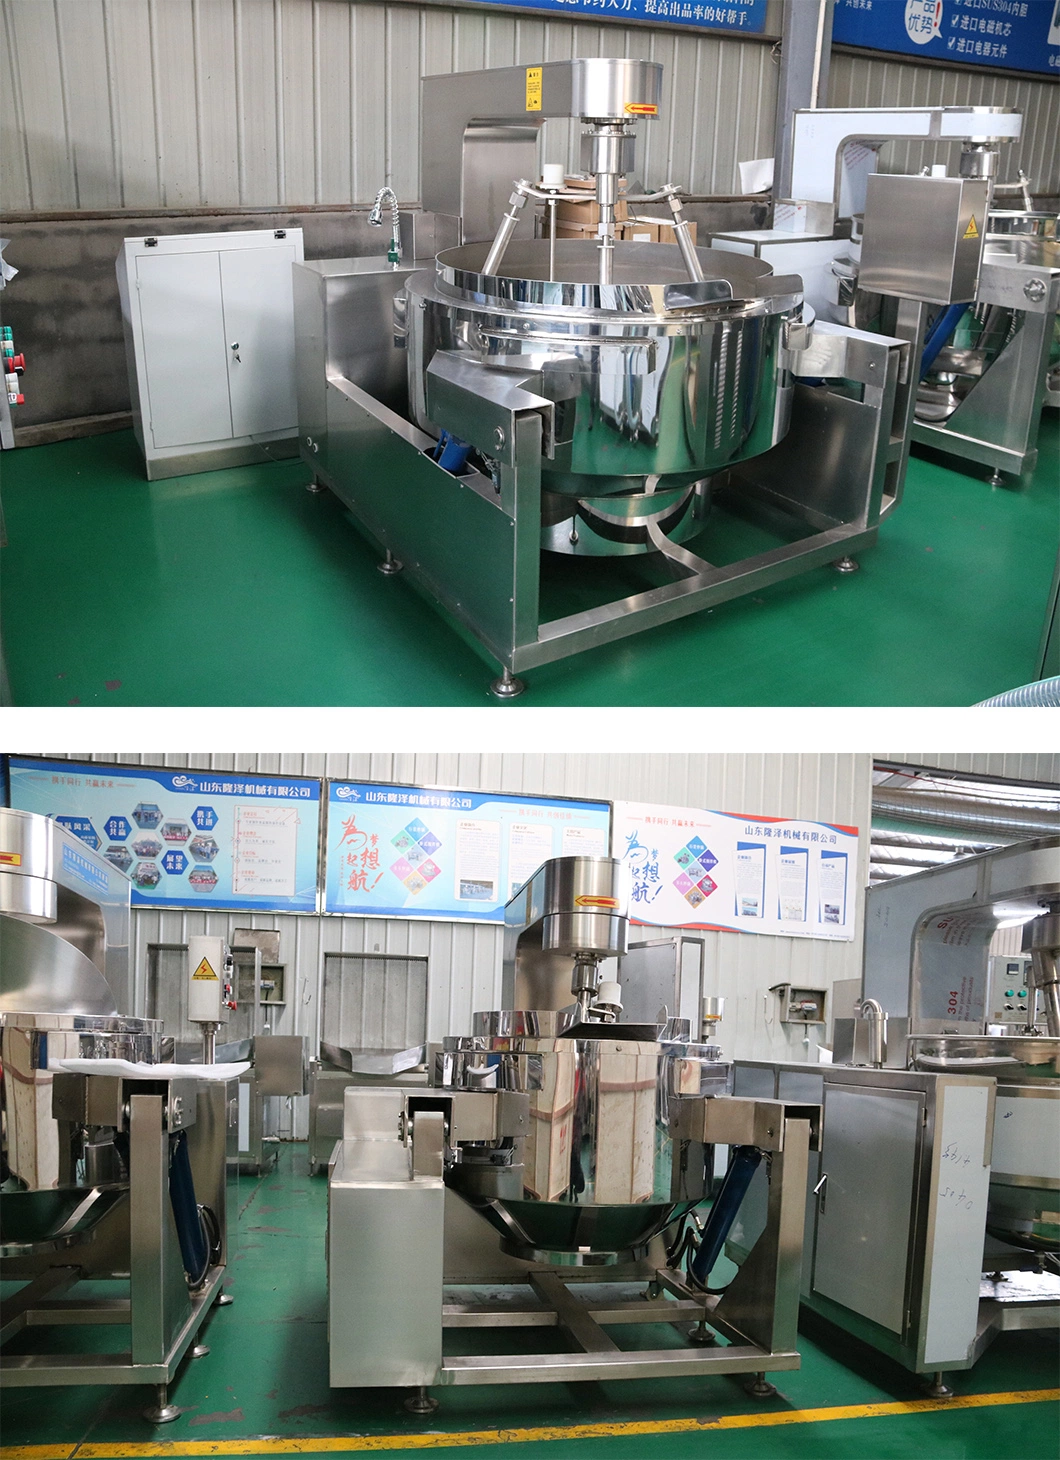 Restaurant Commercial Automatic Multi Function Planetary Tilting Curry Chili Bean Paste Mixing Making Electric Gas Steam Chicken Sauce Cooking Wok